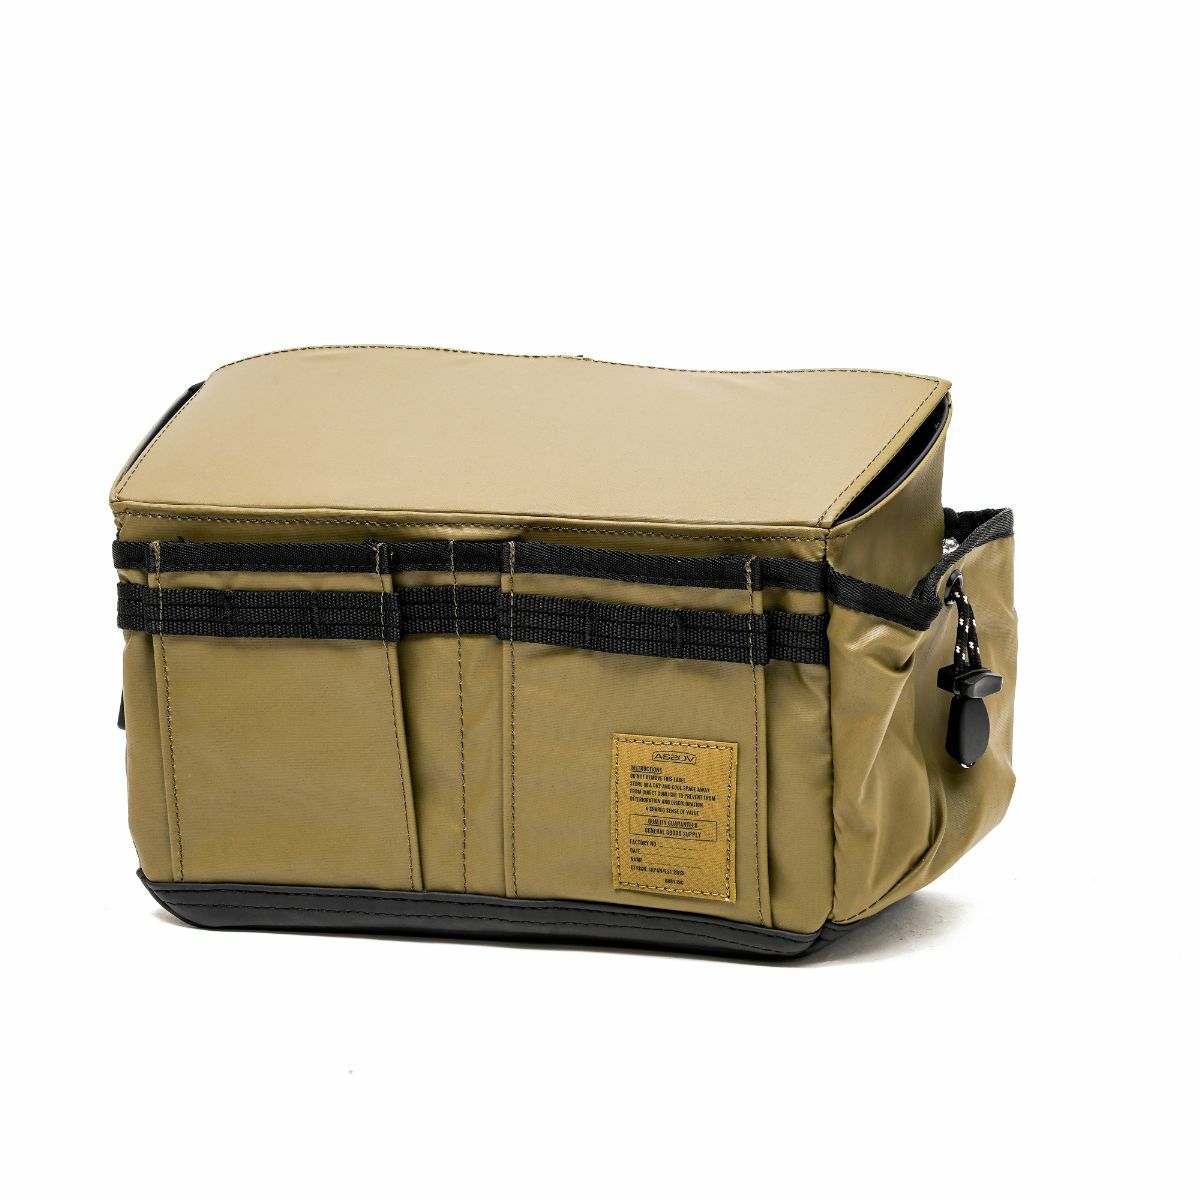 AS2OV – POLYCA SIDE CONTAINER 23